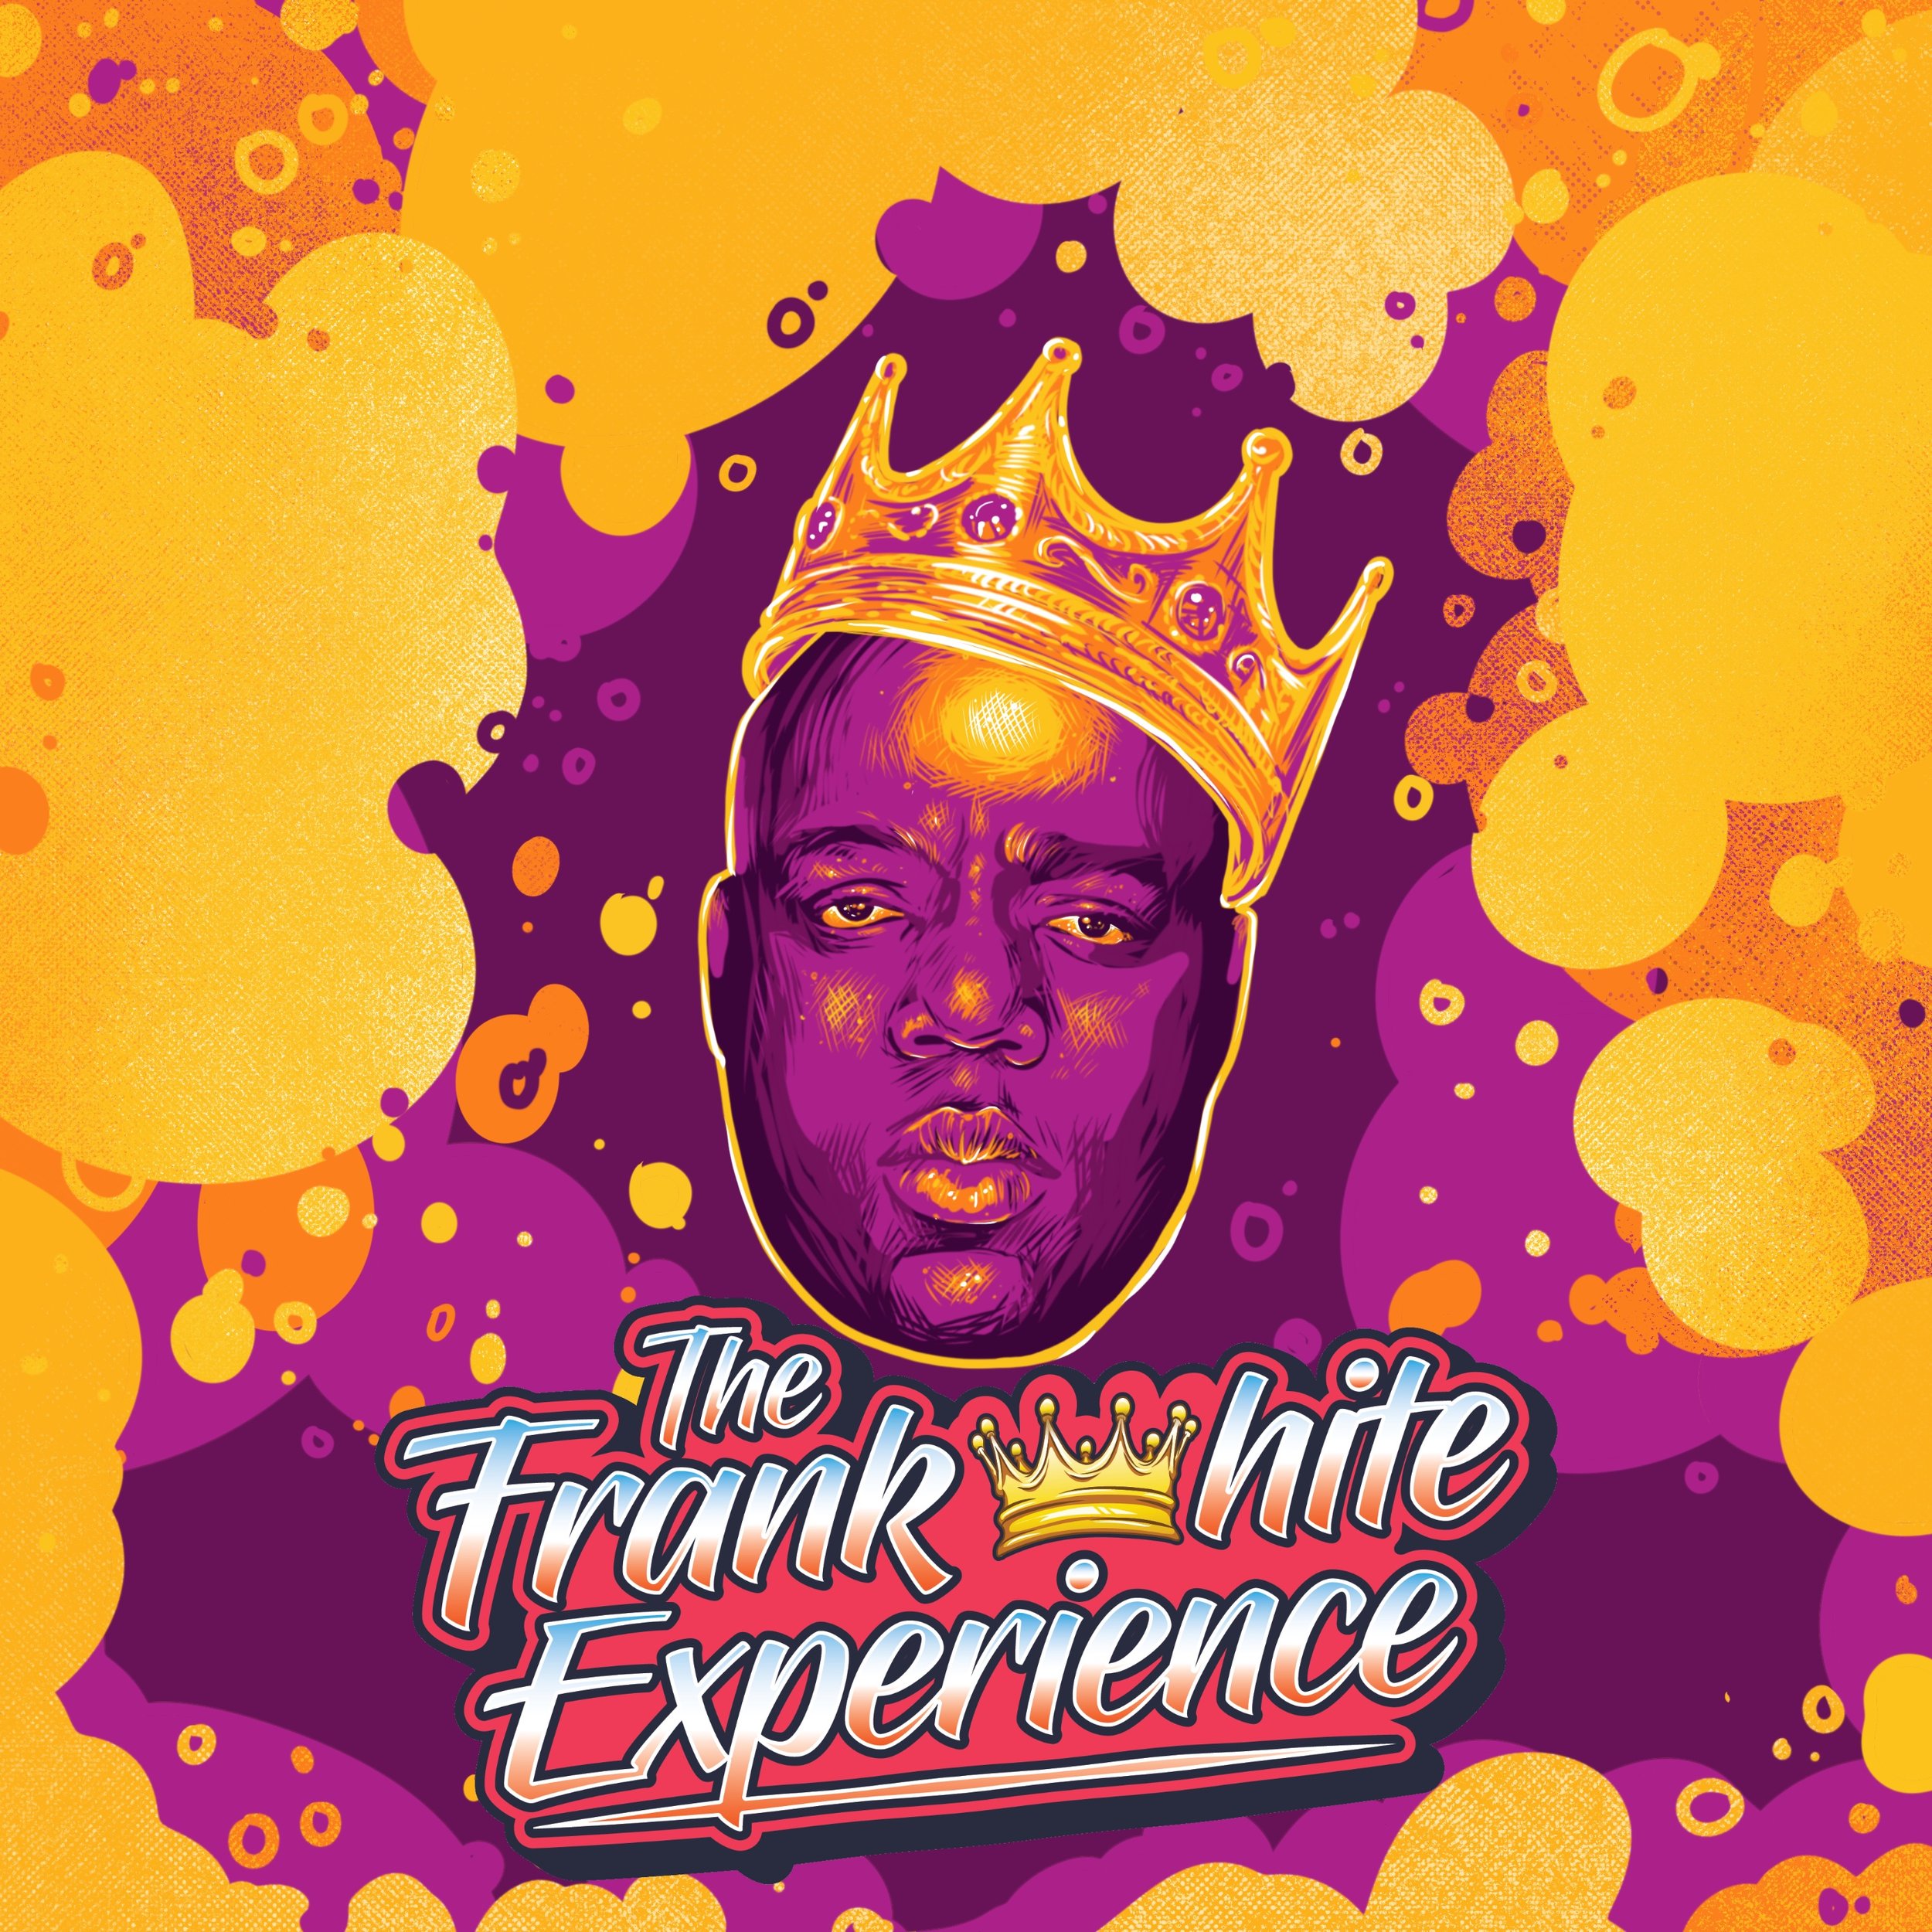 The Frank White Experience - A Live Tribute to The Notorious B.I.G.